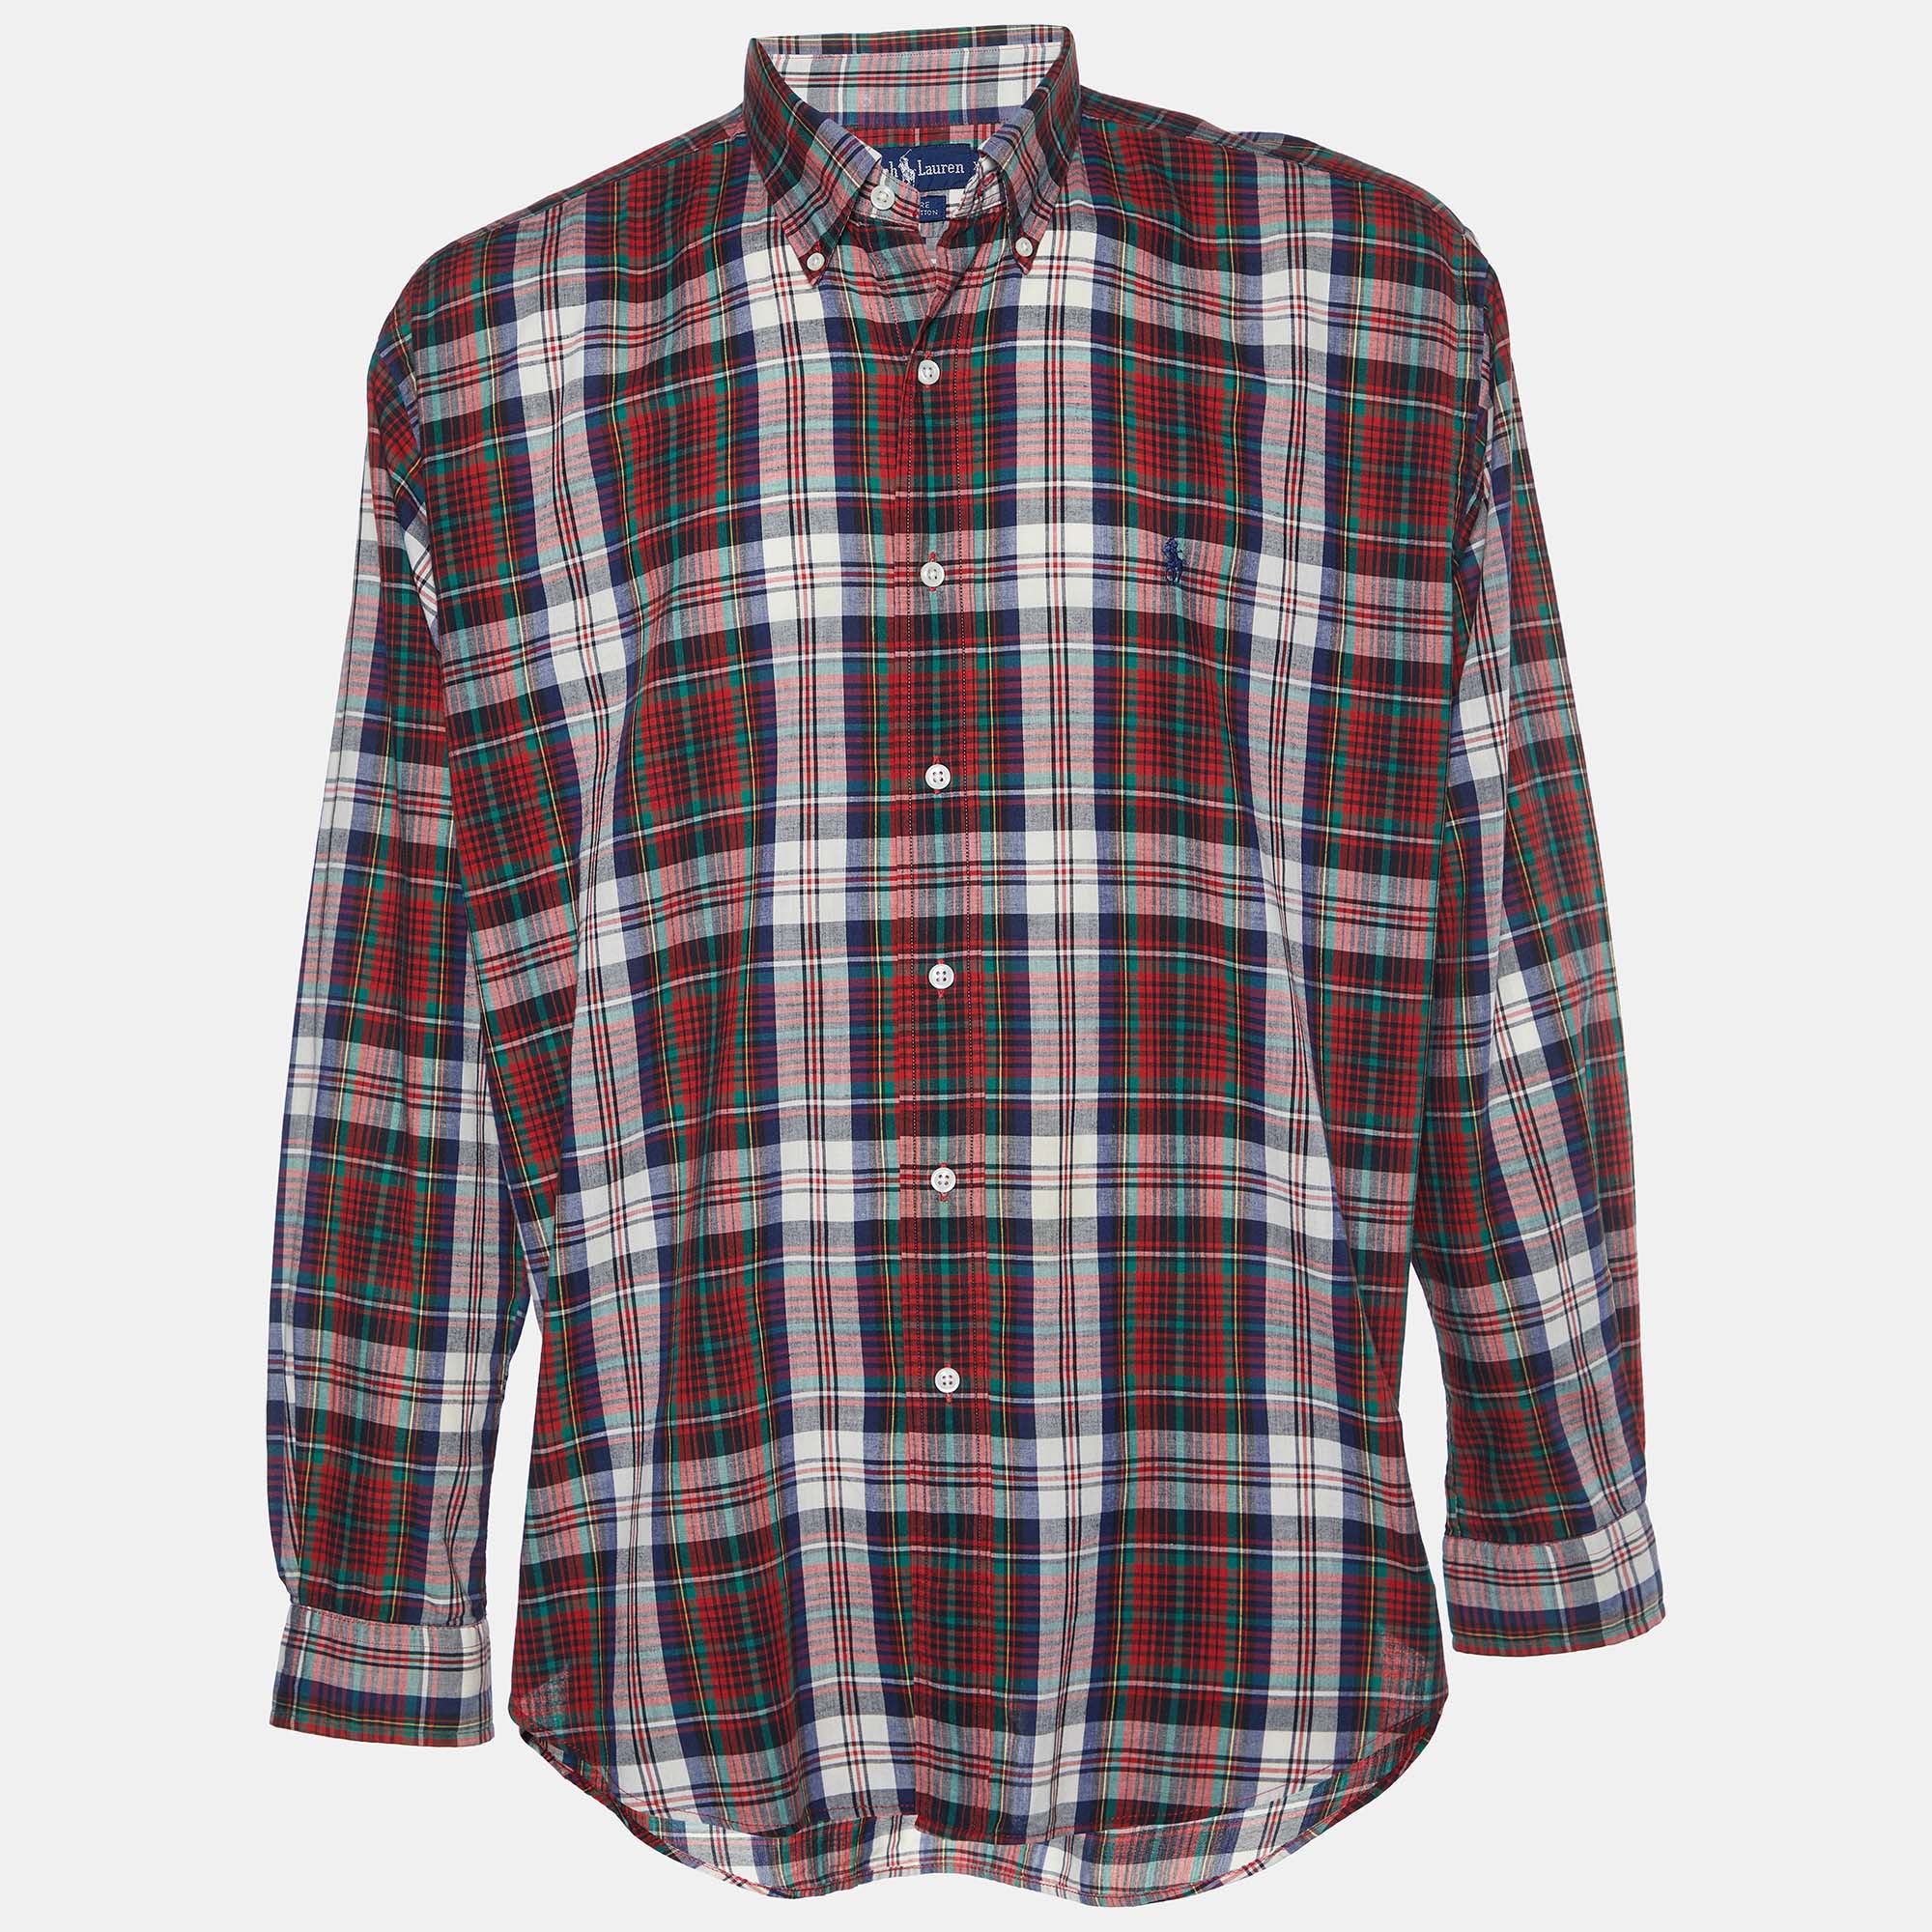 As shirts are an indispensable part of a wardrobe Ralph Lauren brings you a creation that is both versatile and stylish. It has been tailored from high quality fabric for a classy look and fit.